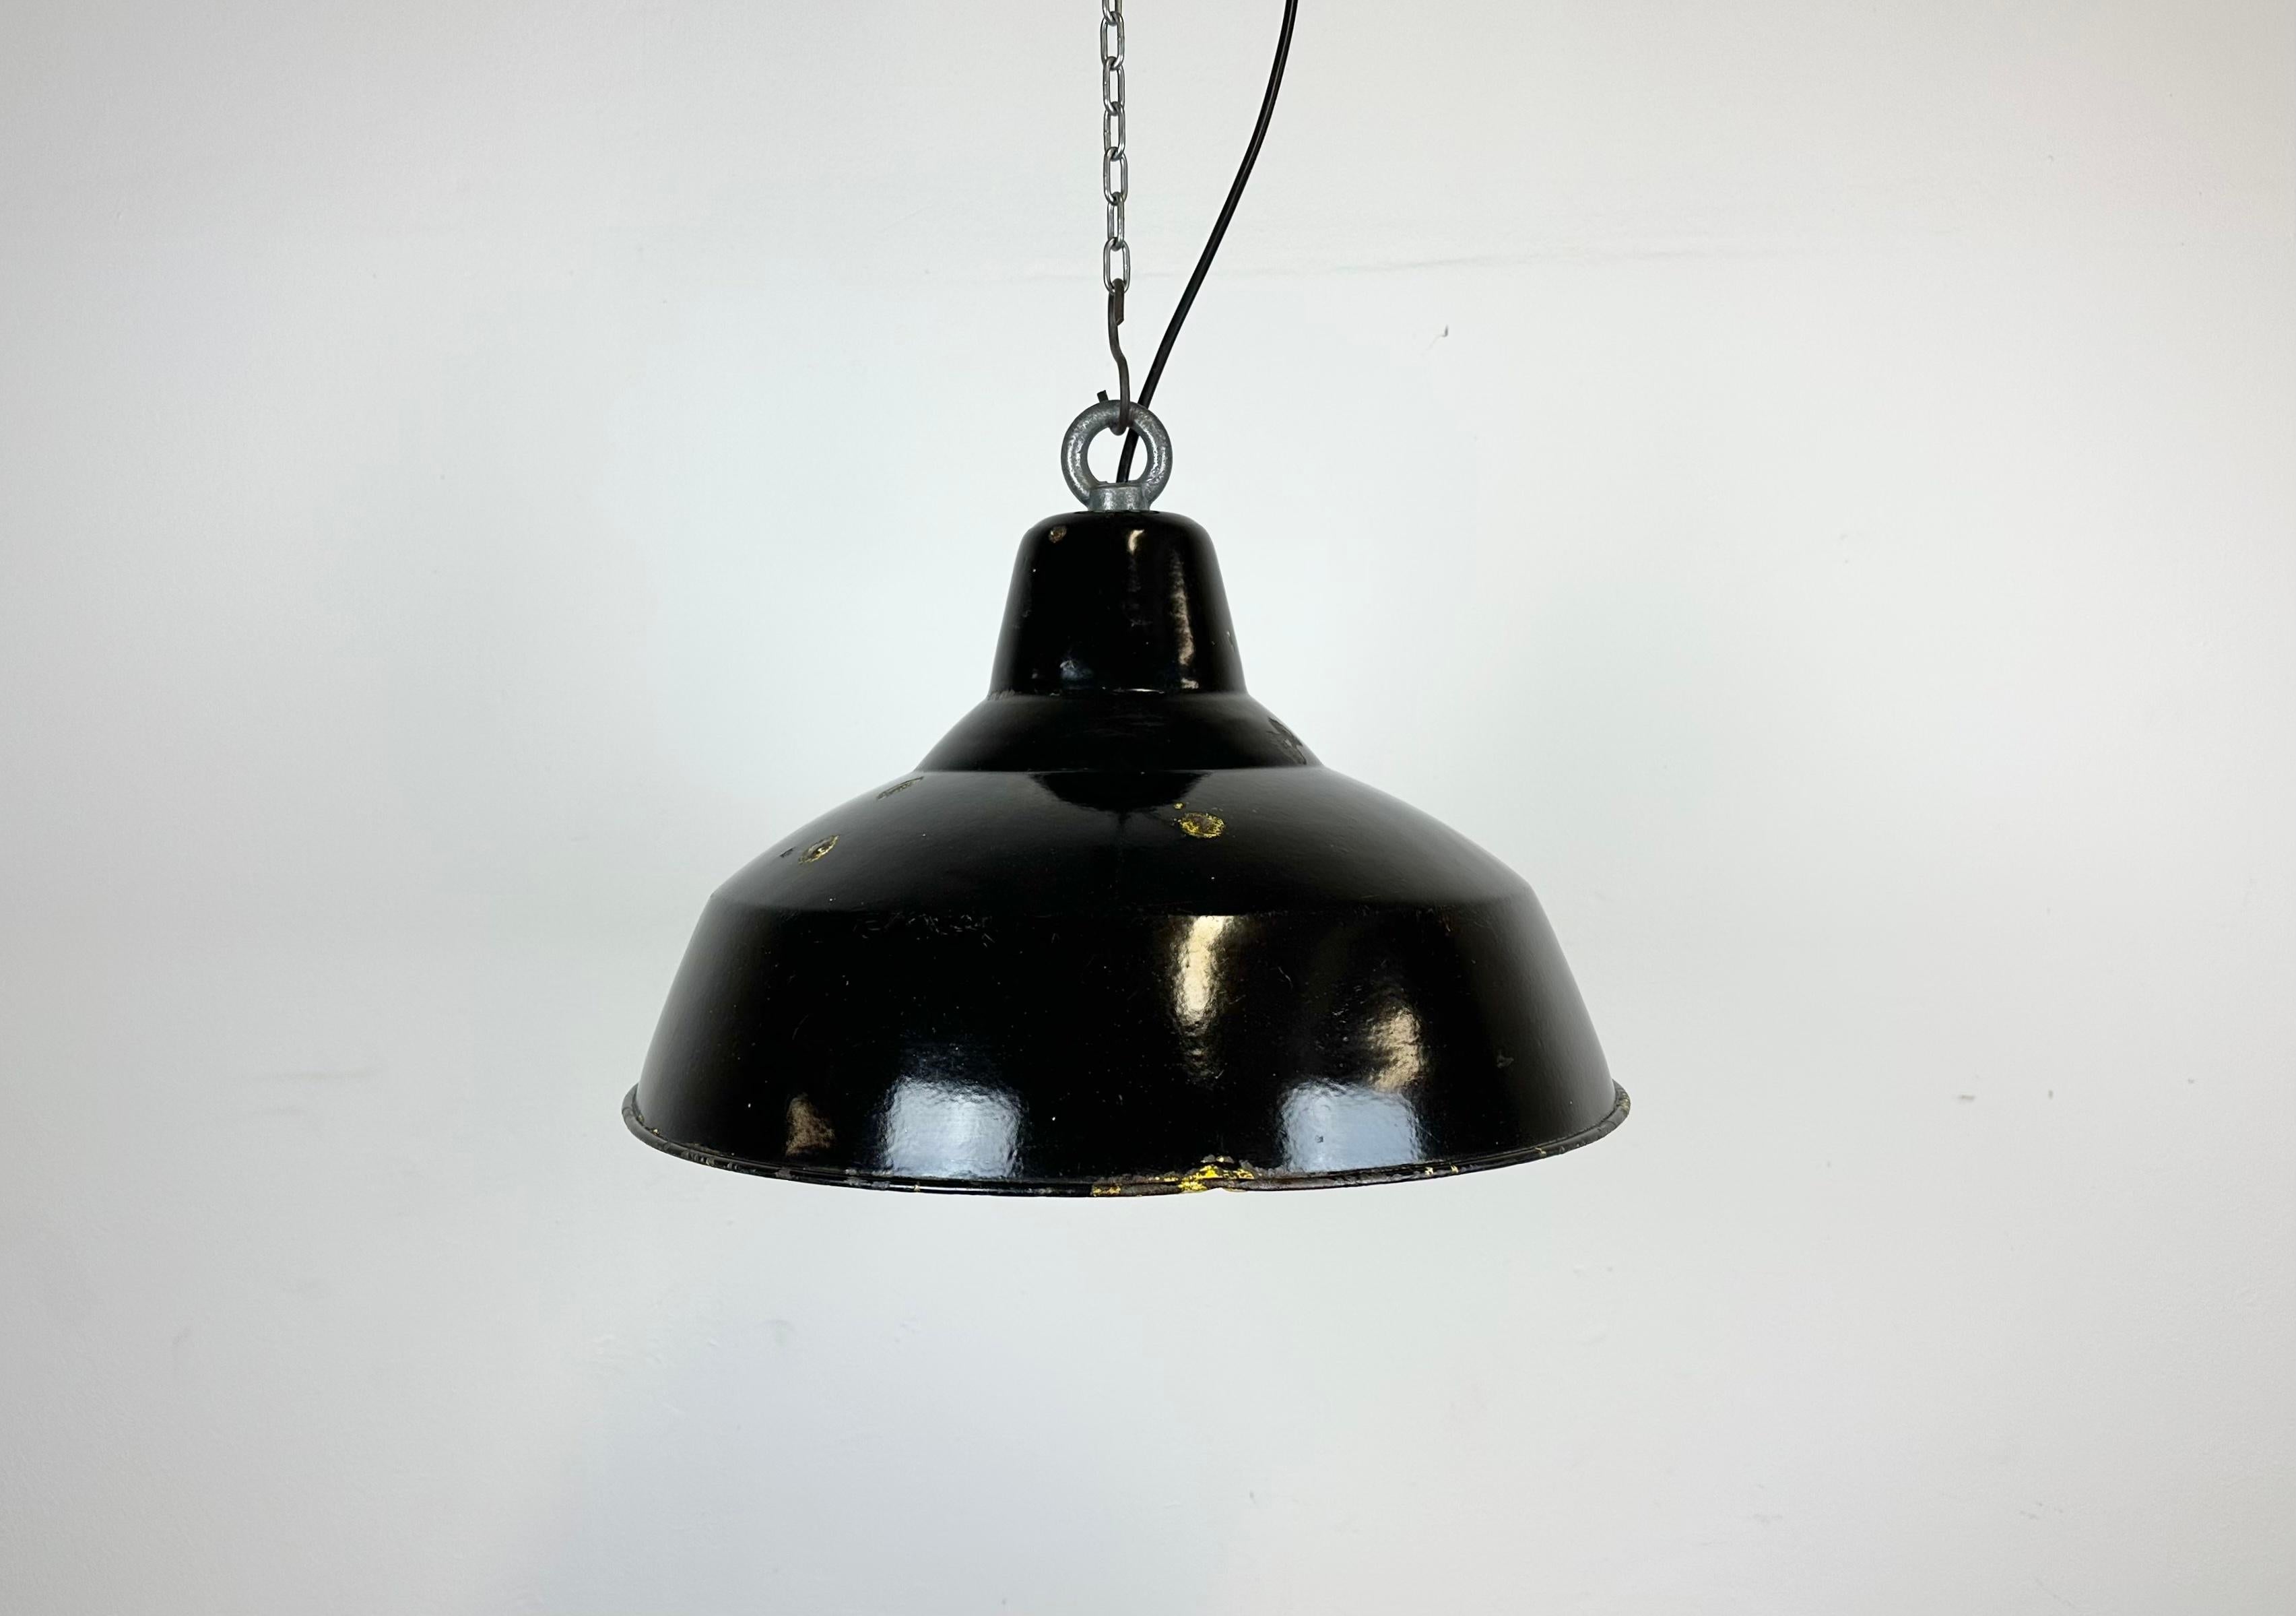 Industrial black enamel pendant light made in former Czechoslovakia during the 1960s. White enamel inside the shade. Iron top. The porcelain socket requires E 27/ E26 light bulbs. New wire. Fully functional. The weight of the lamp is 1,5 kg.